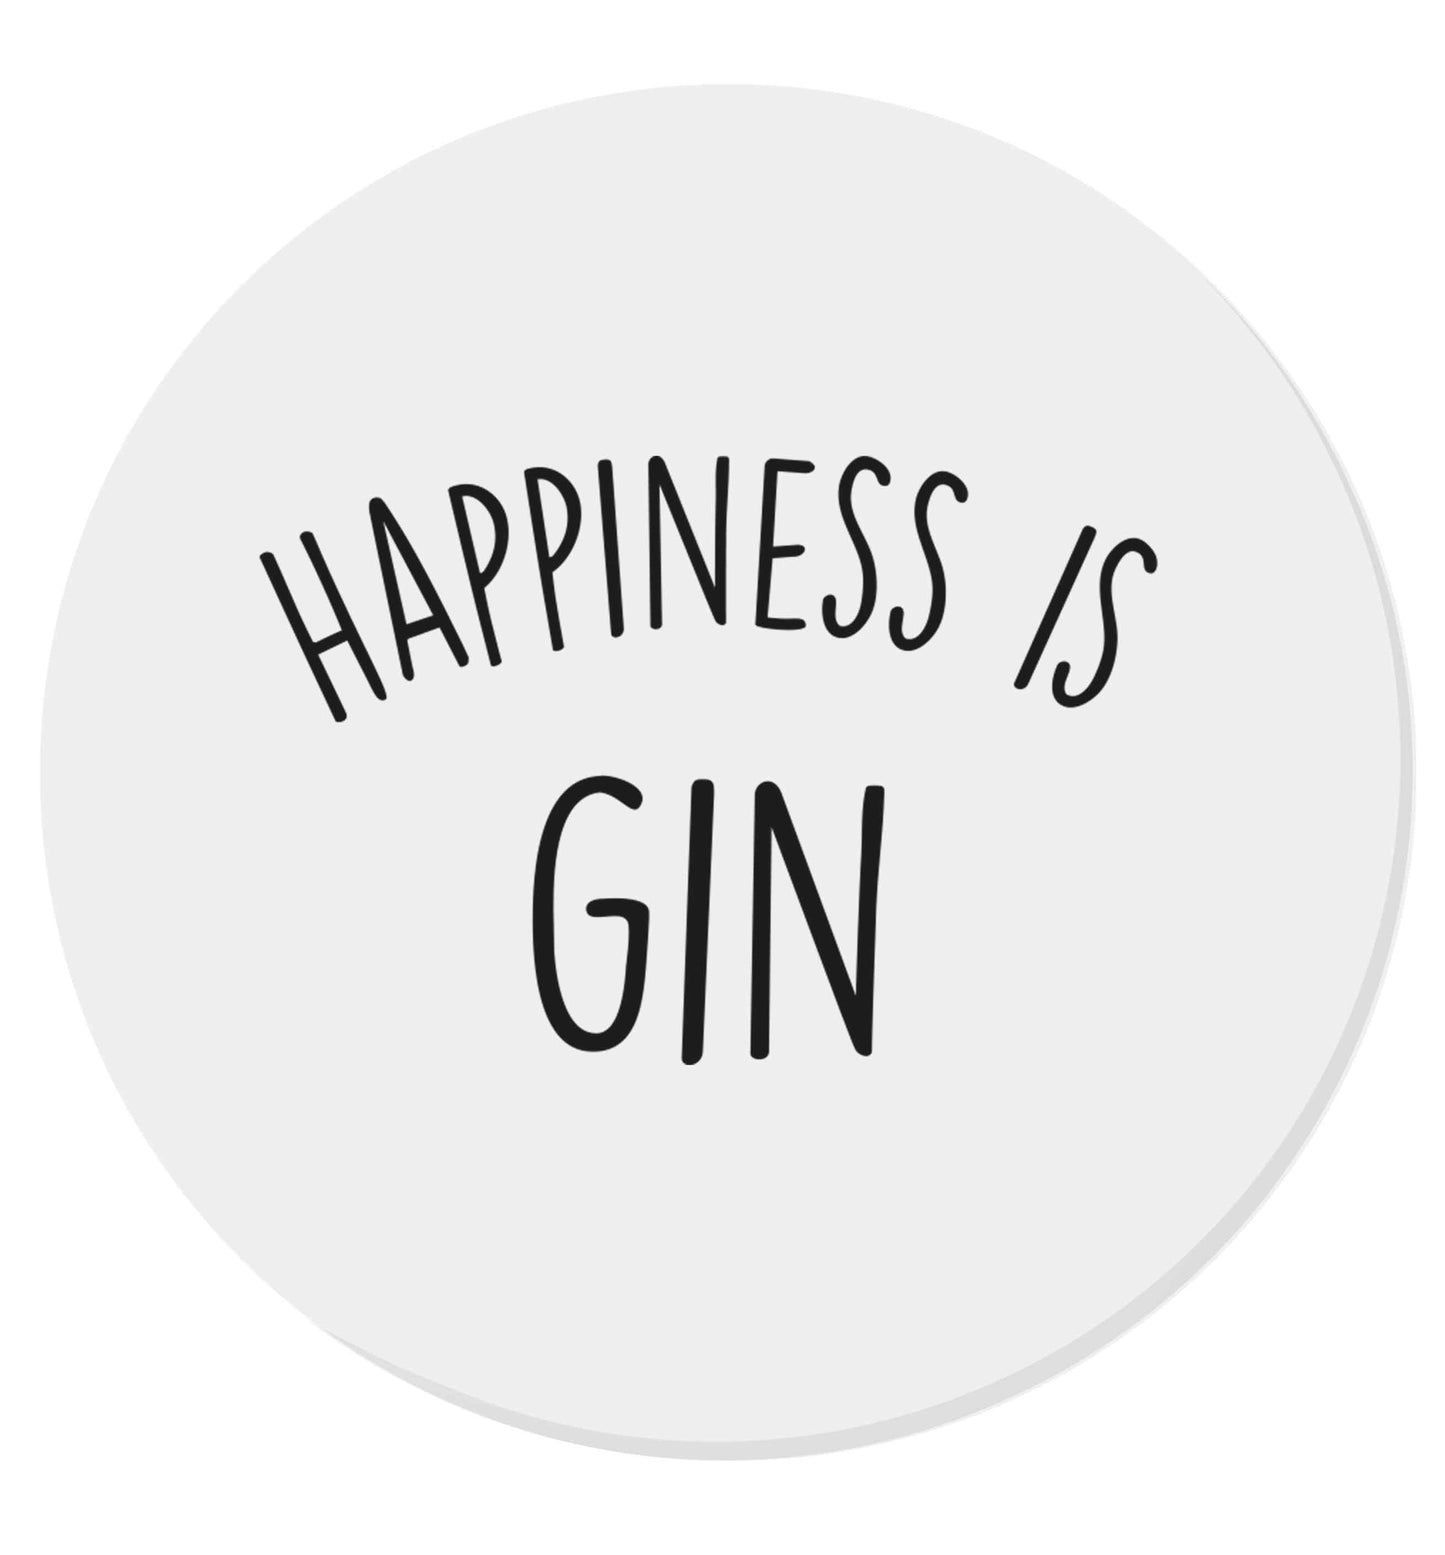 Happiness is gin | Magnet